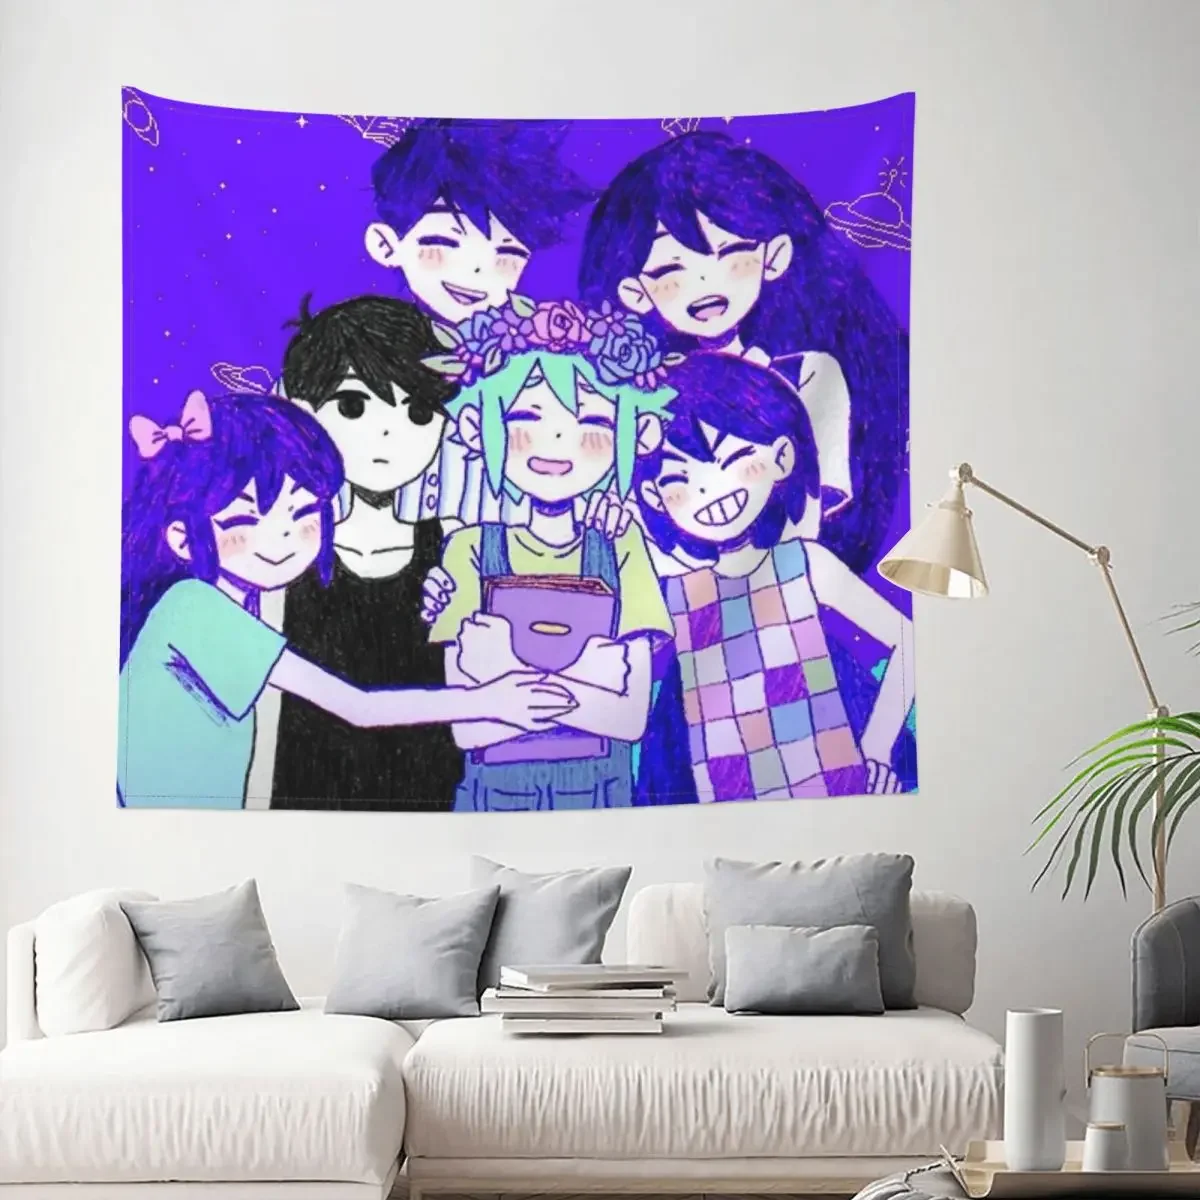 Omori Character Tapestry Wall Hanging Hippie Polyester Wall Tapestry Horror Game Fantasy Decoration Room Decor